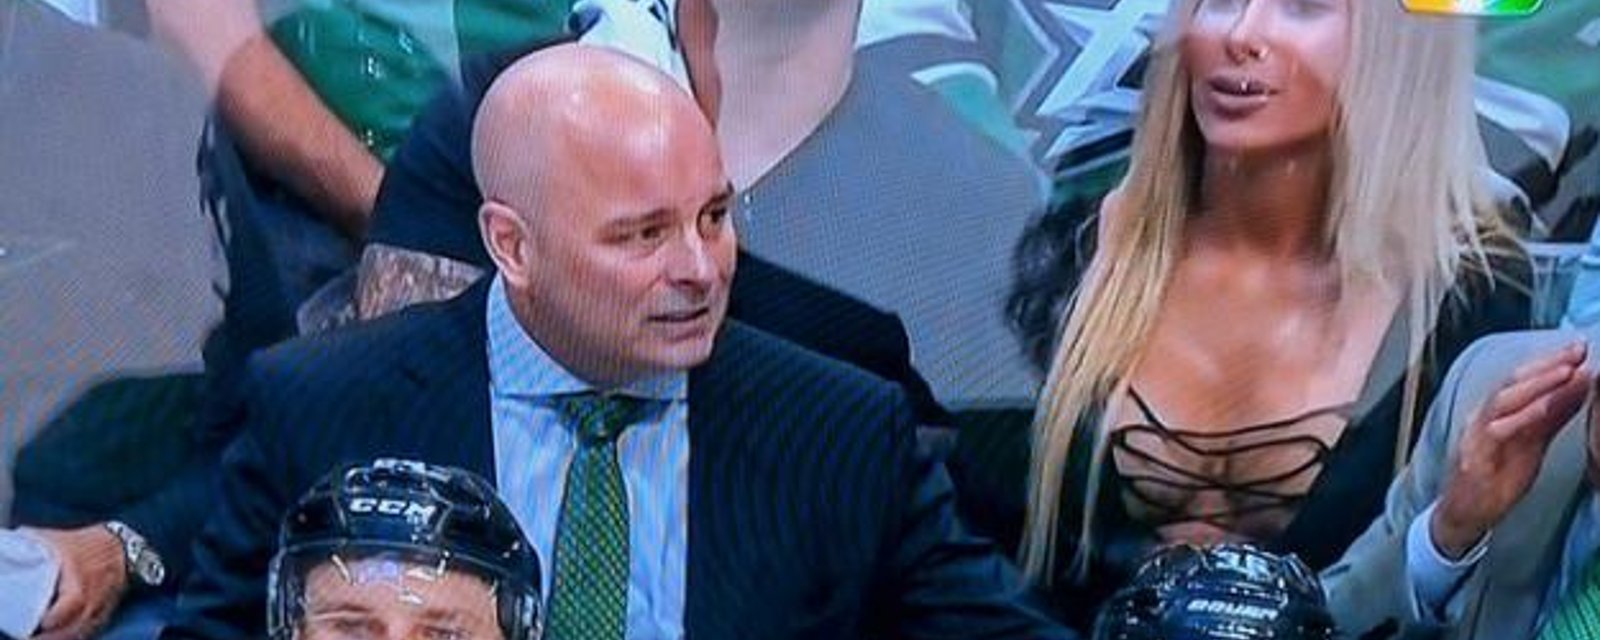 Man shows up for Game 7 dressed up as sexy Instragram model spotted behind Stars’ bench! 